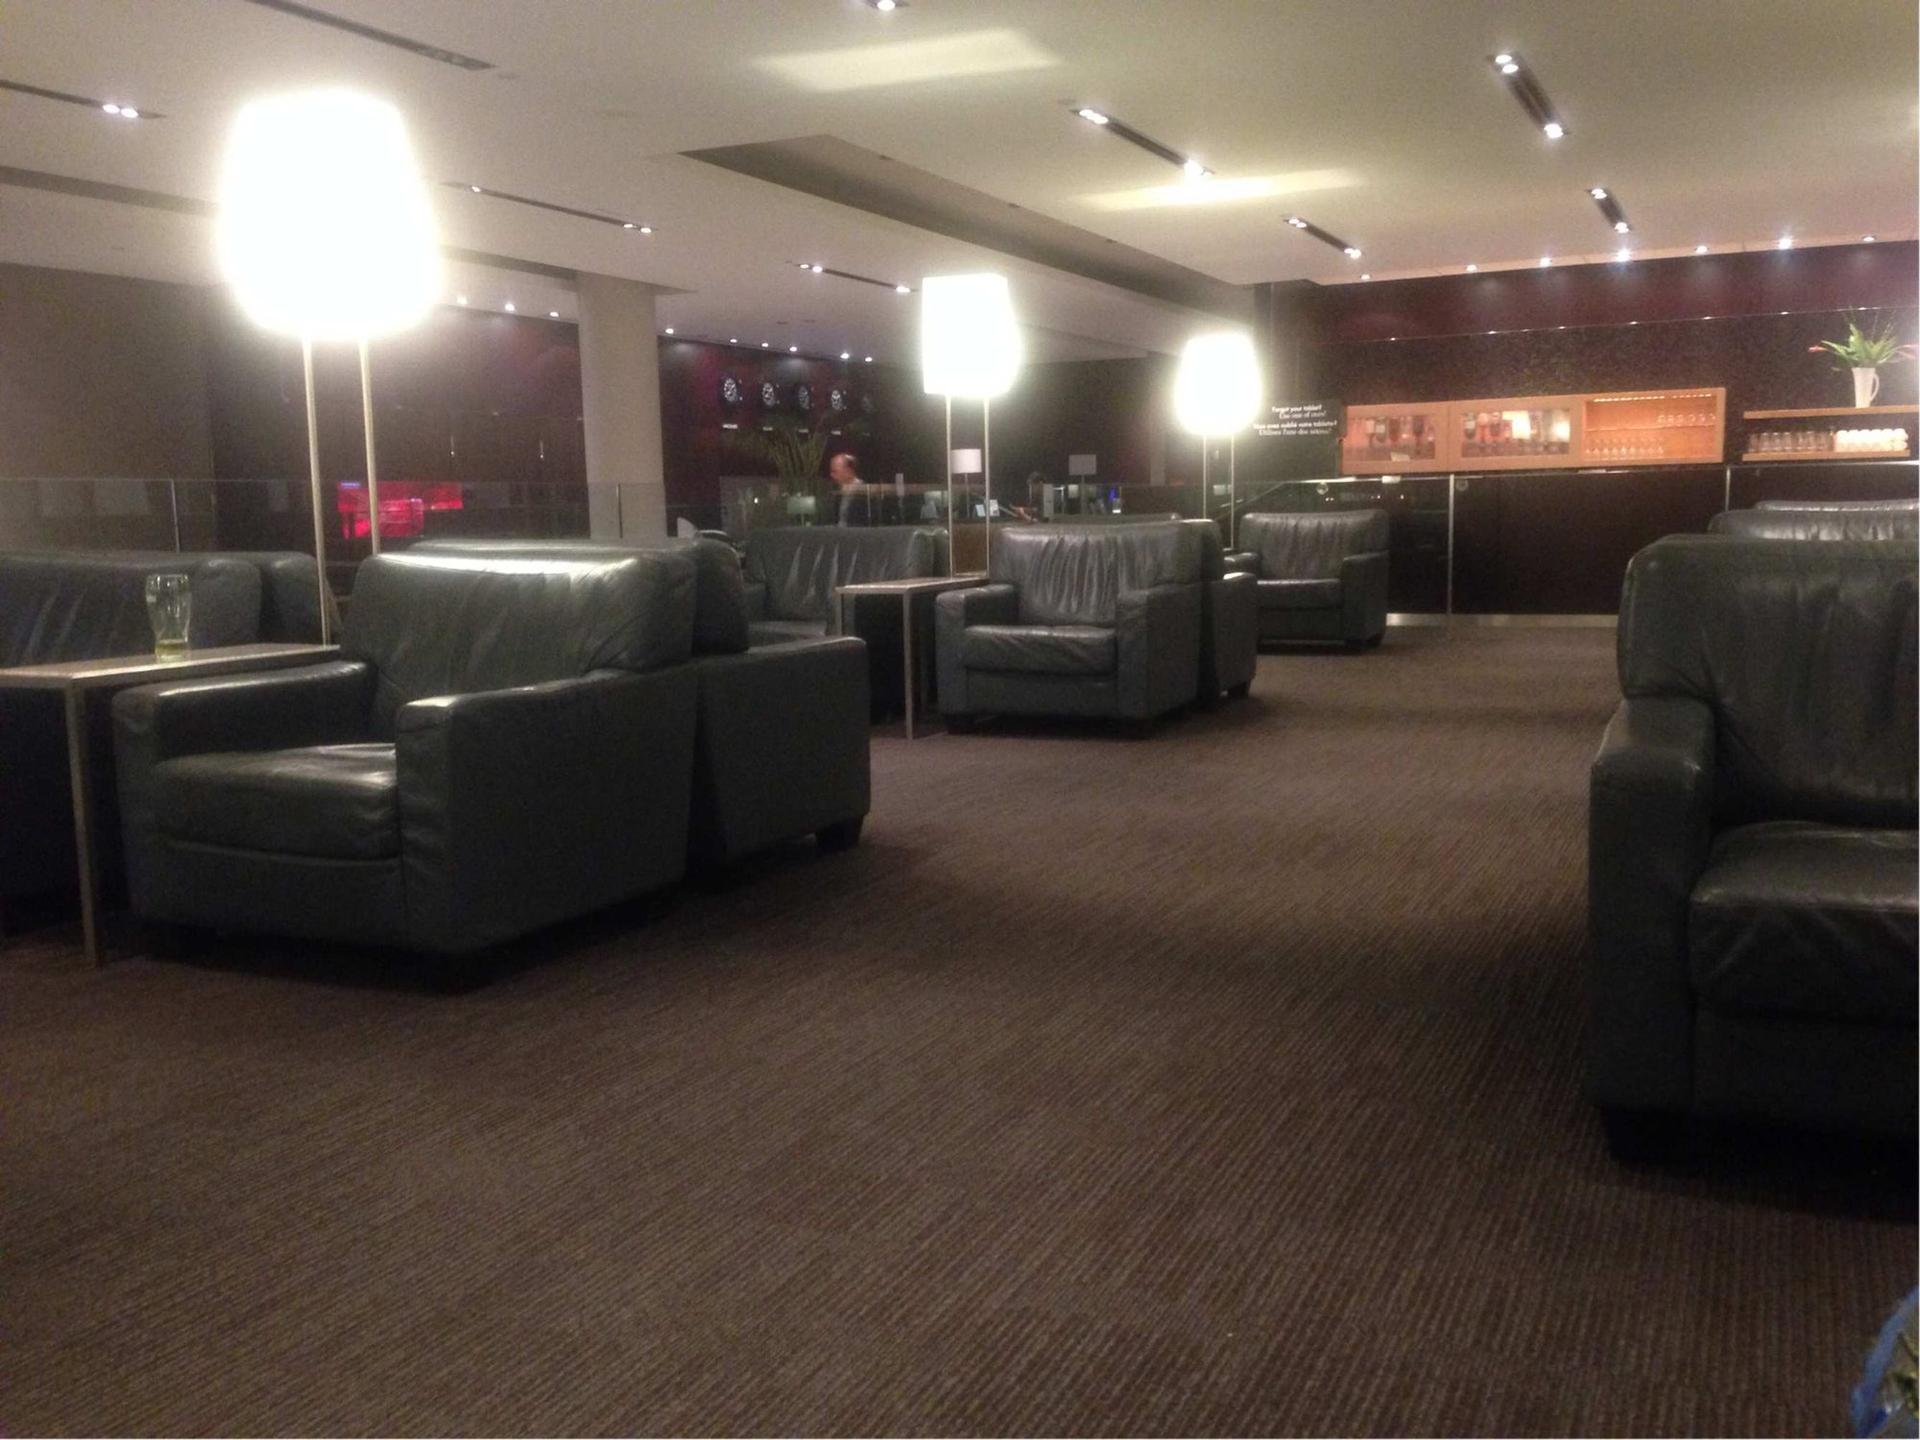 Air Canada Maple Leaf Lounge image 11 of 21